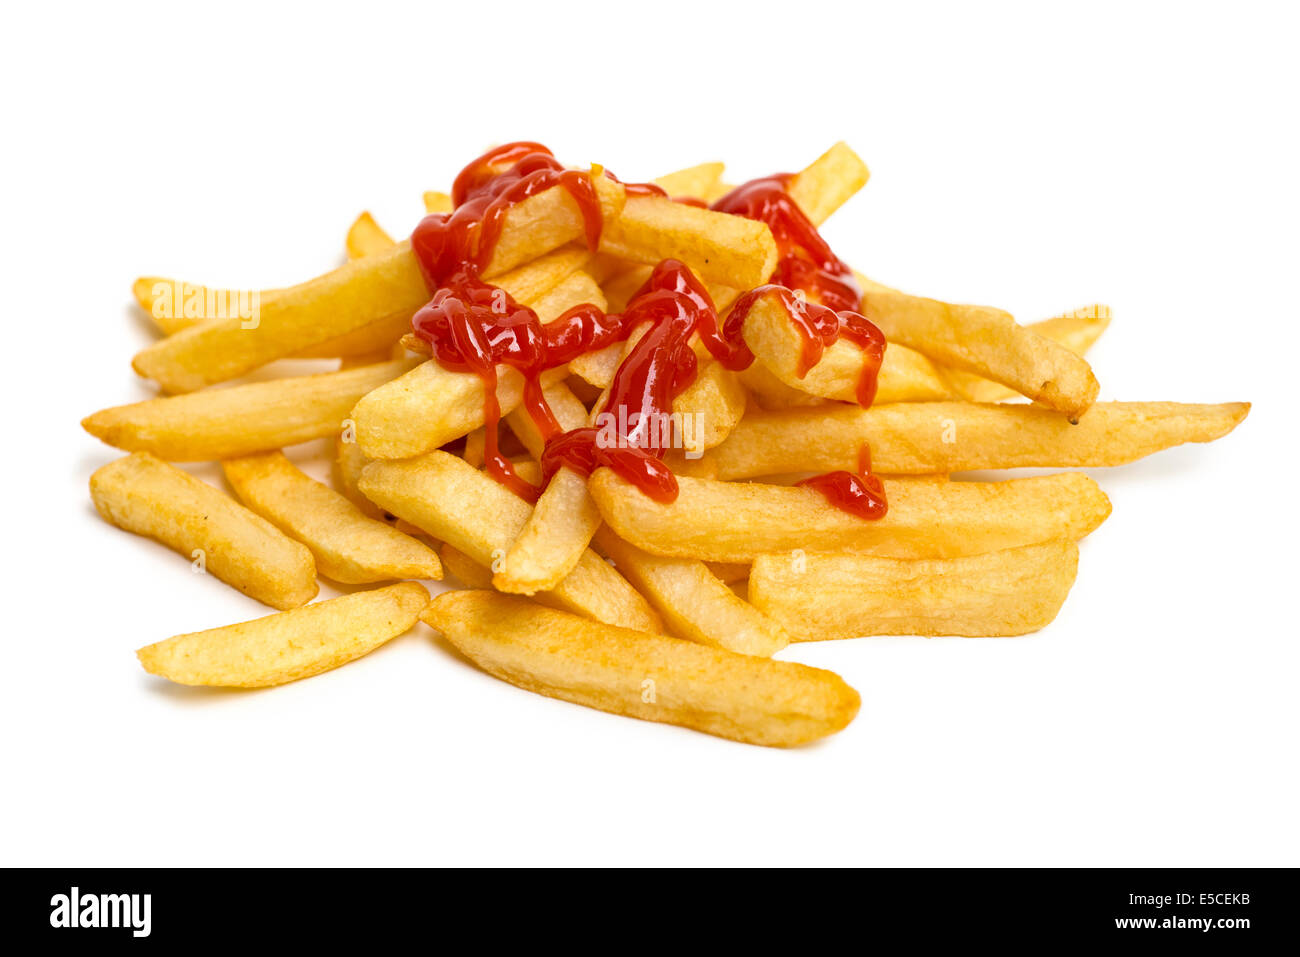 Fries, French Fries with Ketchup, Catsup Sauce Stock Photo